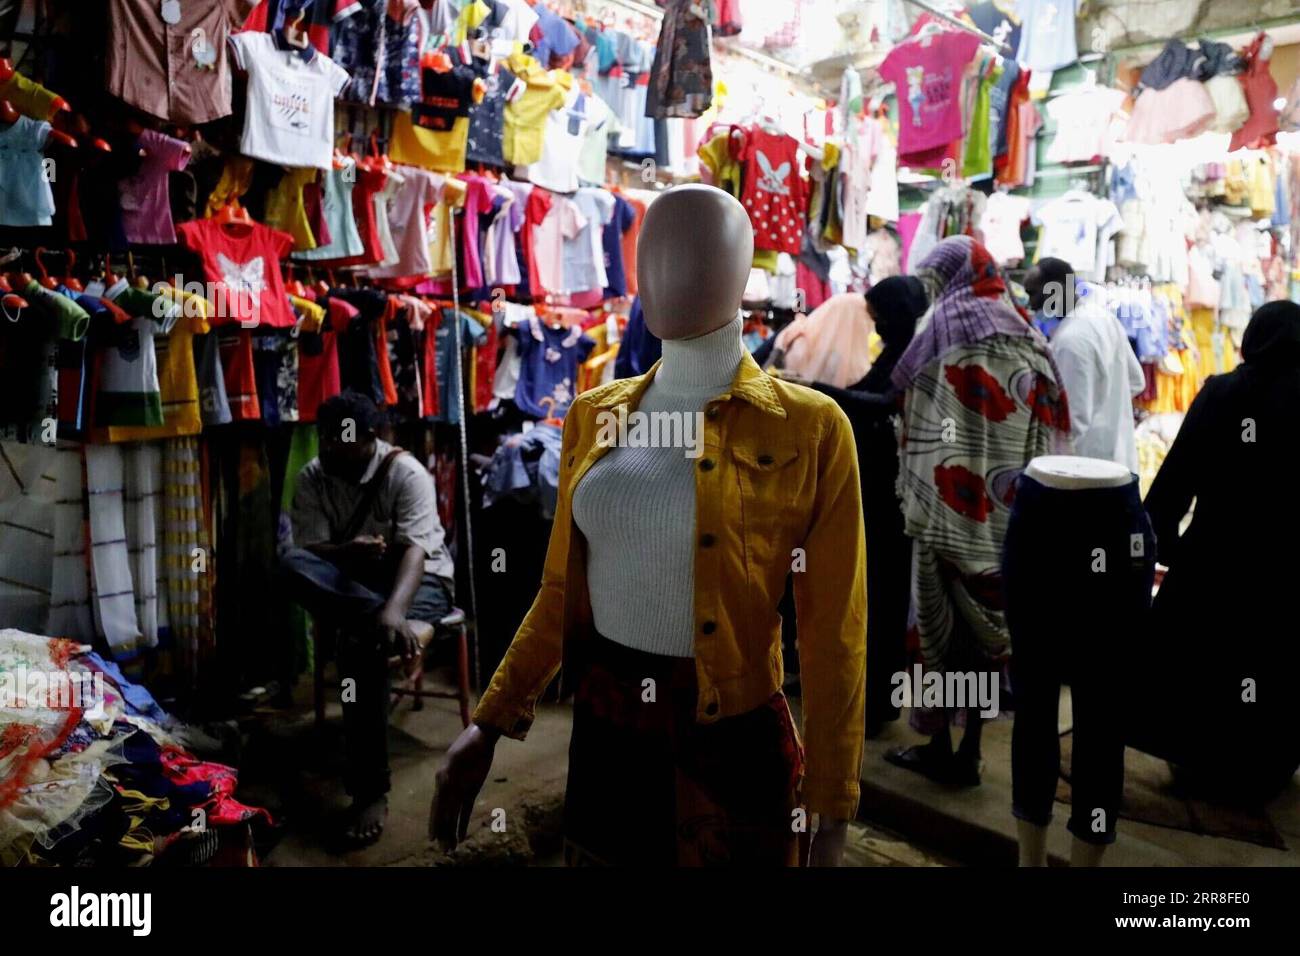 210506 -- KHARTOUM, May 6, 2021 -- Sudanese shop at a market in Khartoum, Sudan, May 5, 2021. Eid Al-Fitr, also called the festival of breaking the fast that marks the end of the month-long dawn-to-sunset fasting of Ramadan, is celebrated by Muslims worldwide.  SUDAN-KHARTOUM-EID AL-FITR-SHOPPING MohamedxKhidir PUBLICATIONxNOTxINxCHN Stock Photo